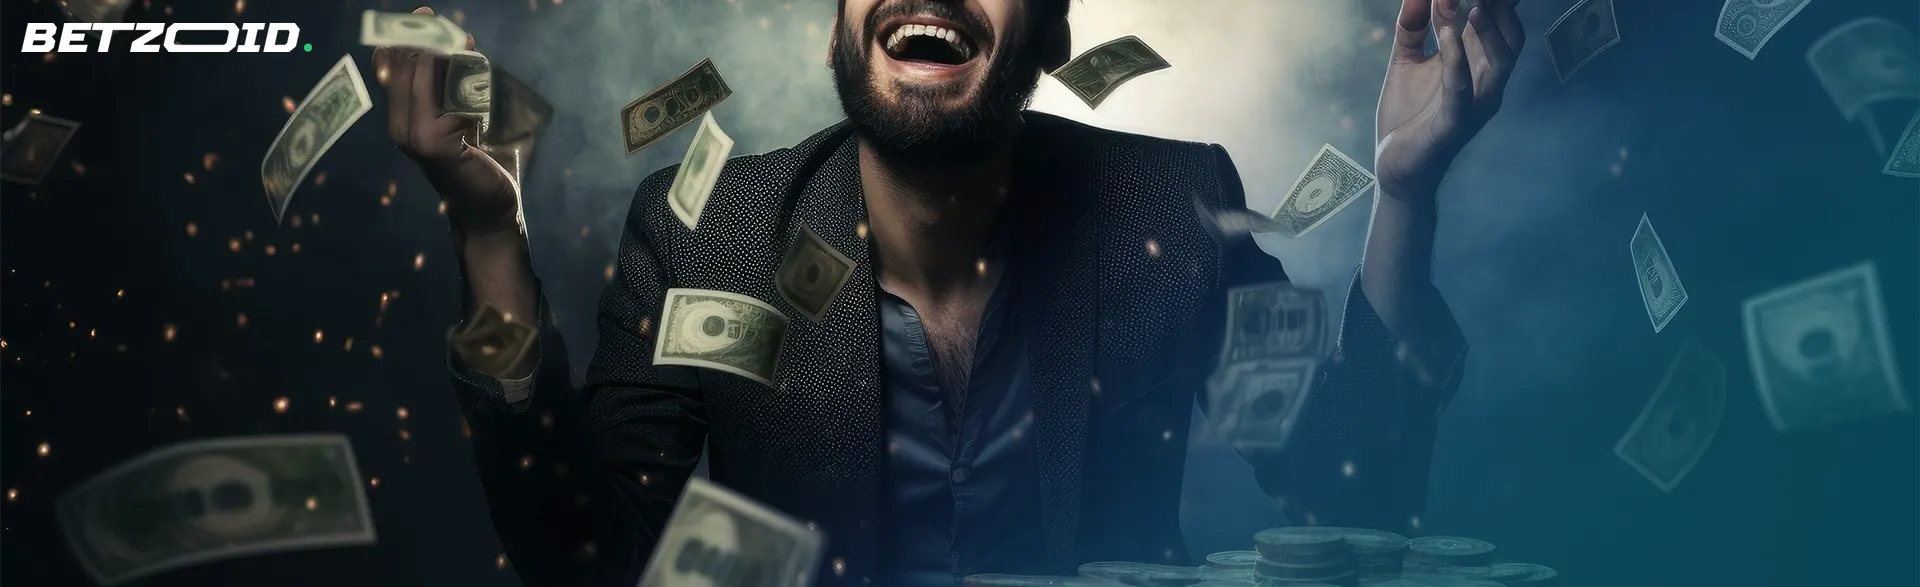 Real money online casinos player surrounded by banknotes.